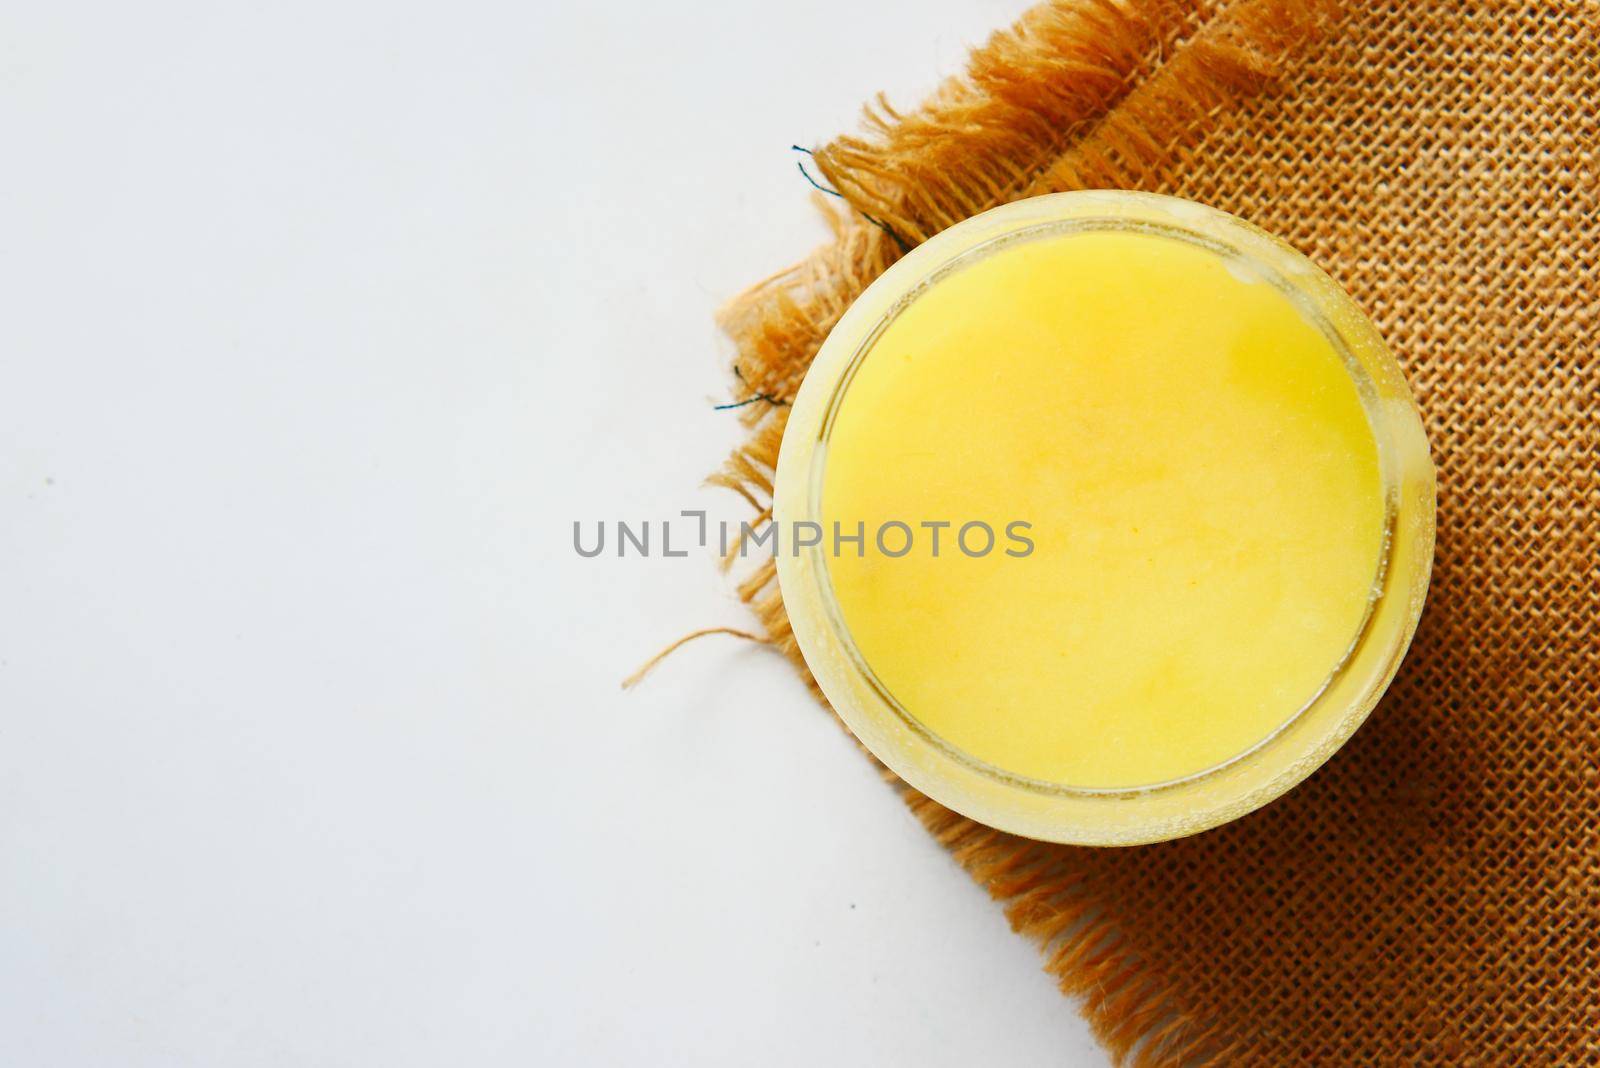 homemade ghee in container on a table